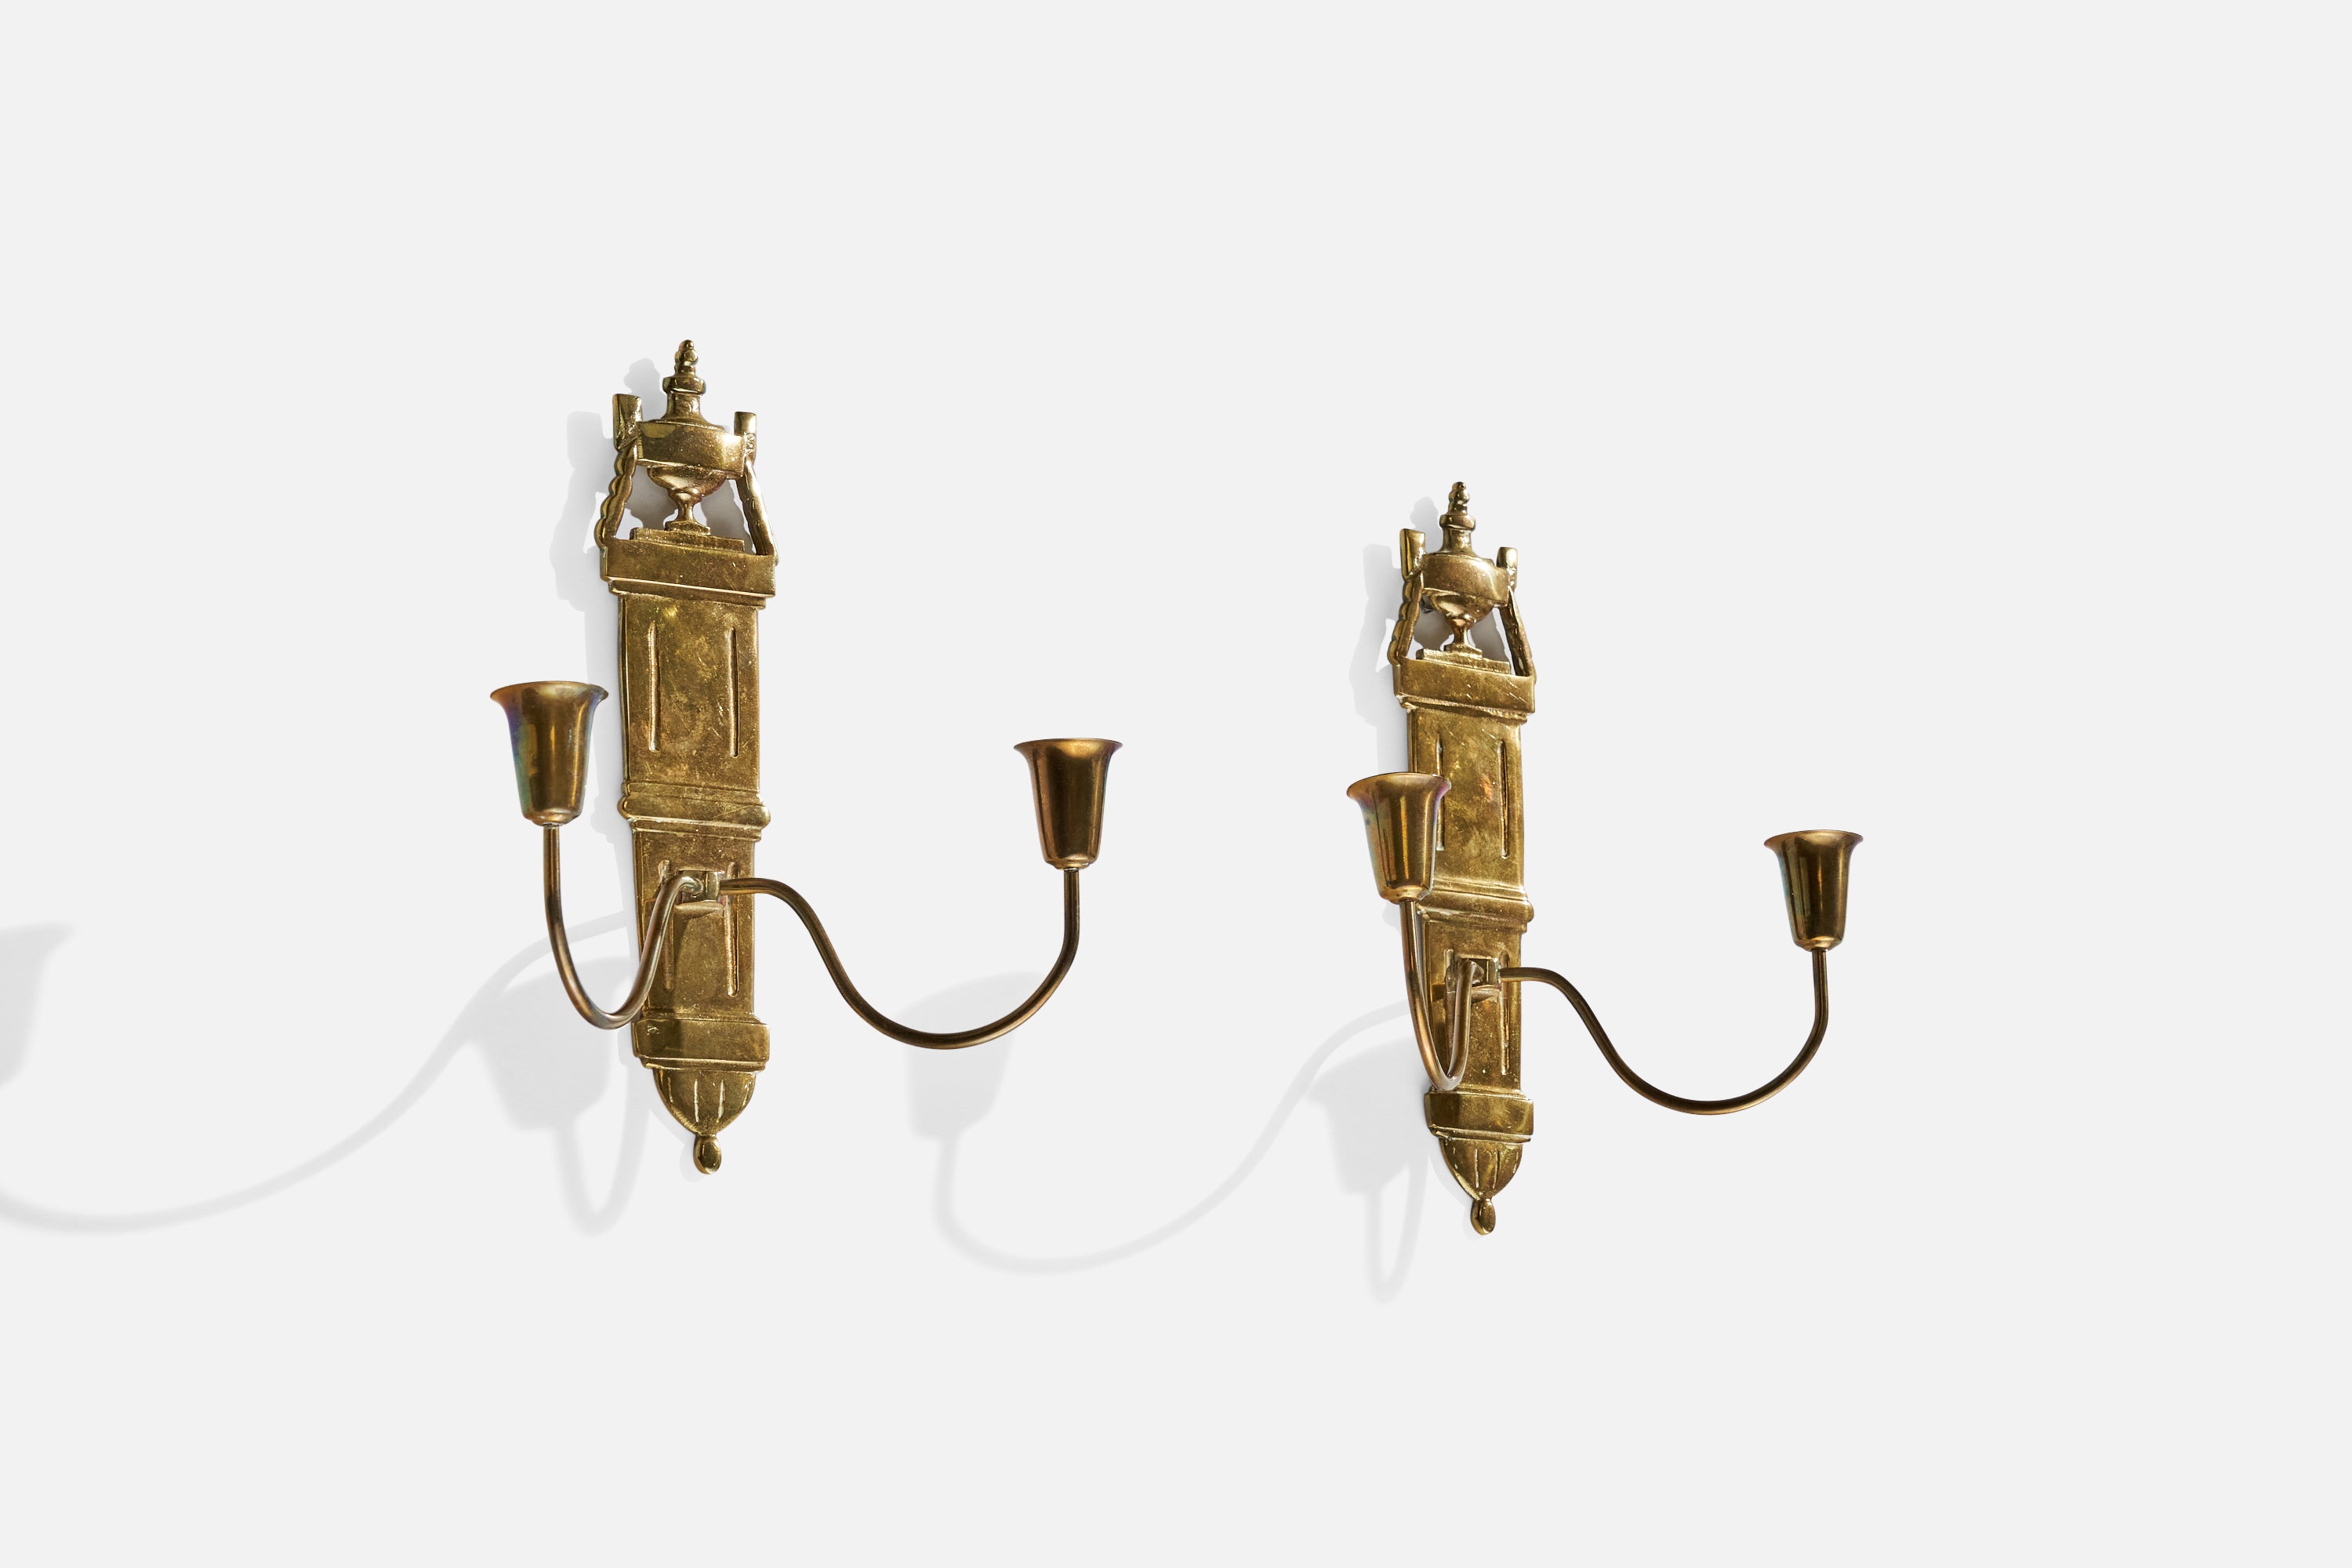 A pair of brass candle sconces designed and produced in Sweden, c. 1940s.

Holds .8” candles.